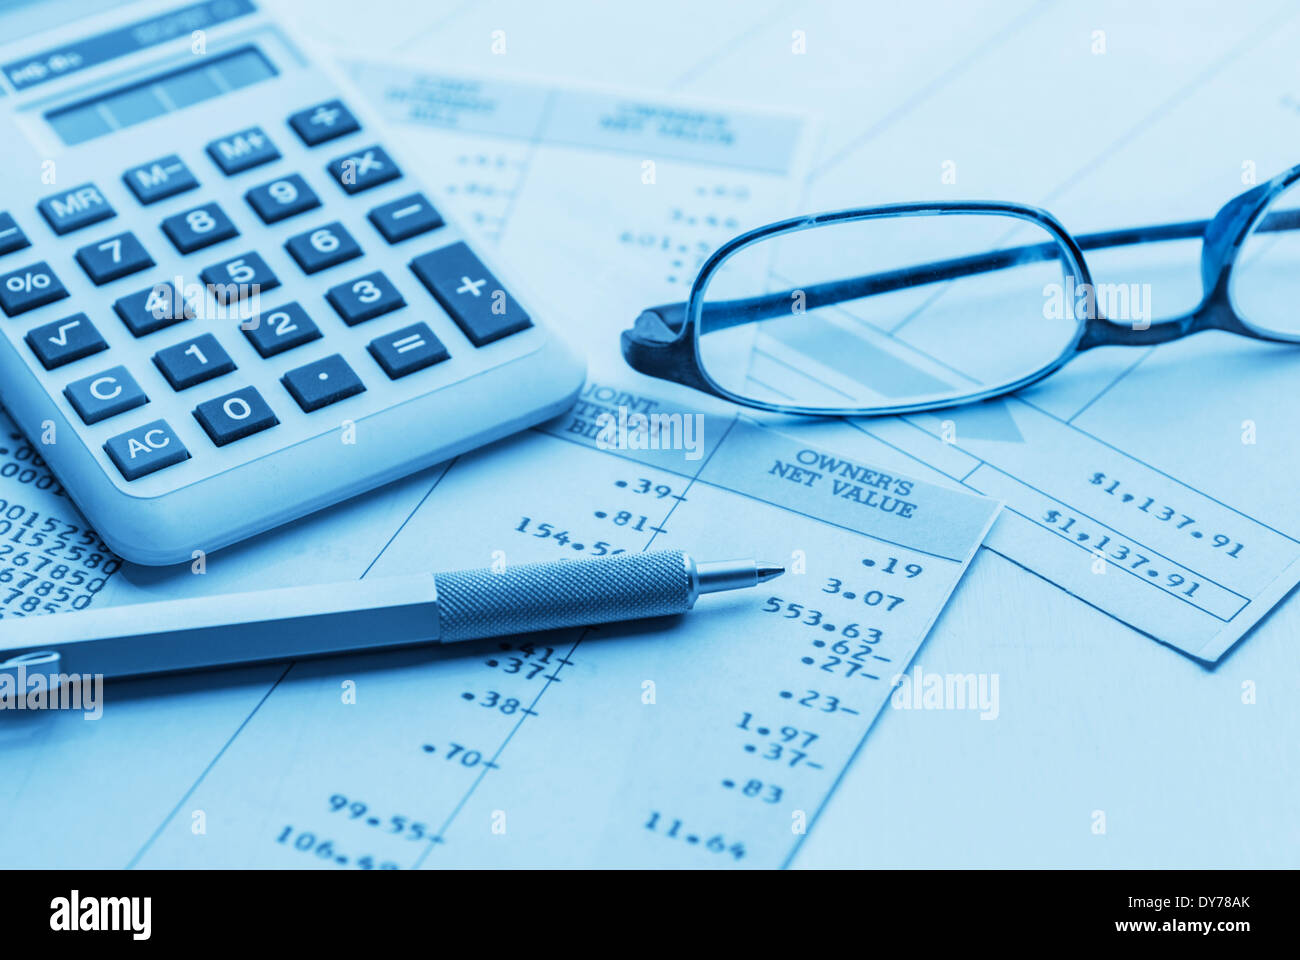 Accounting workspace with calculator, pen and glasses Stock Photo